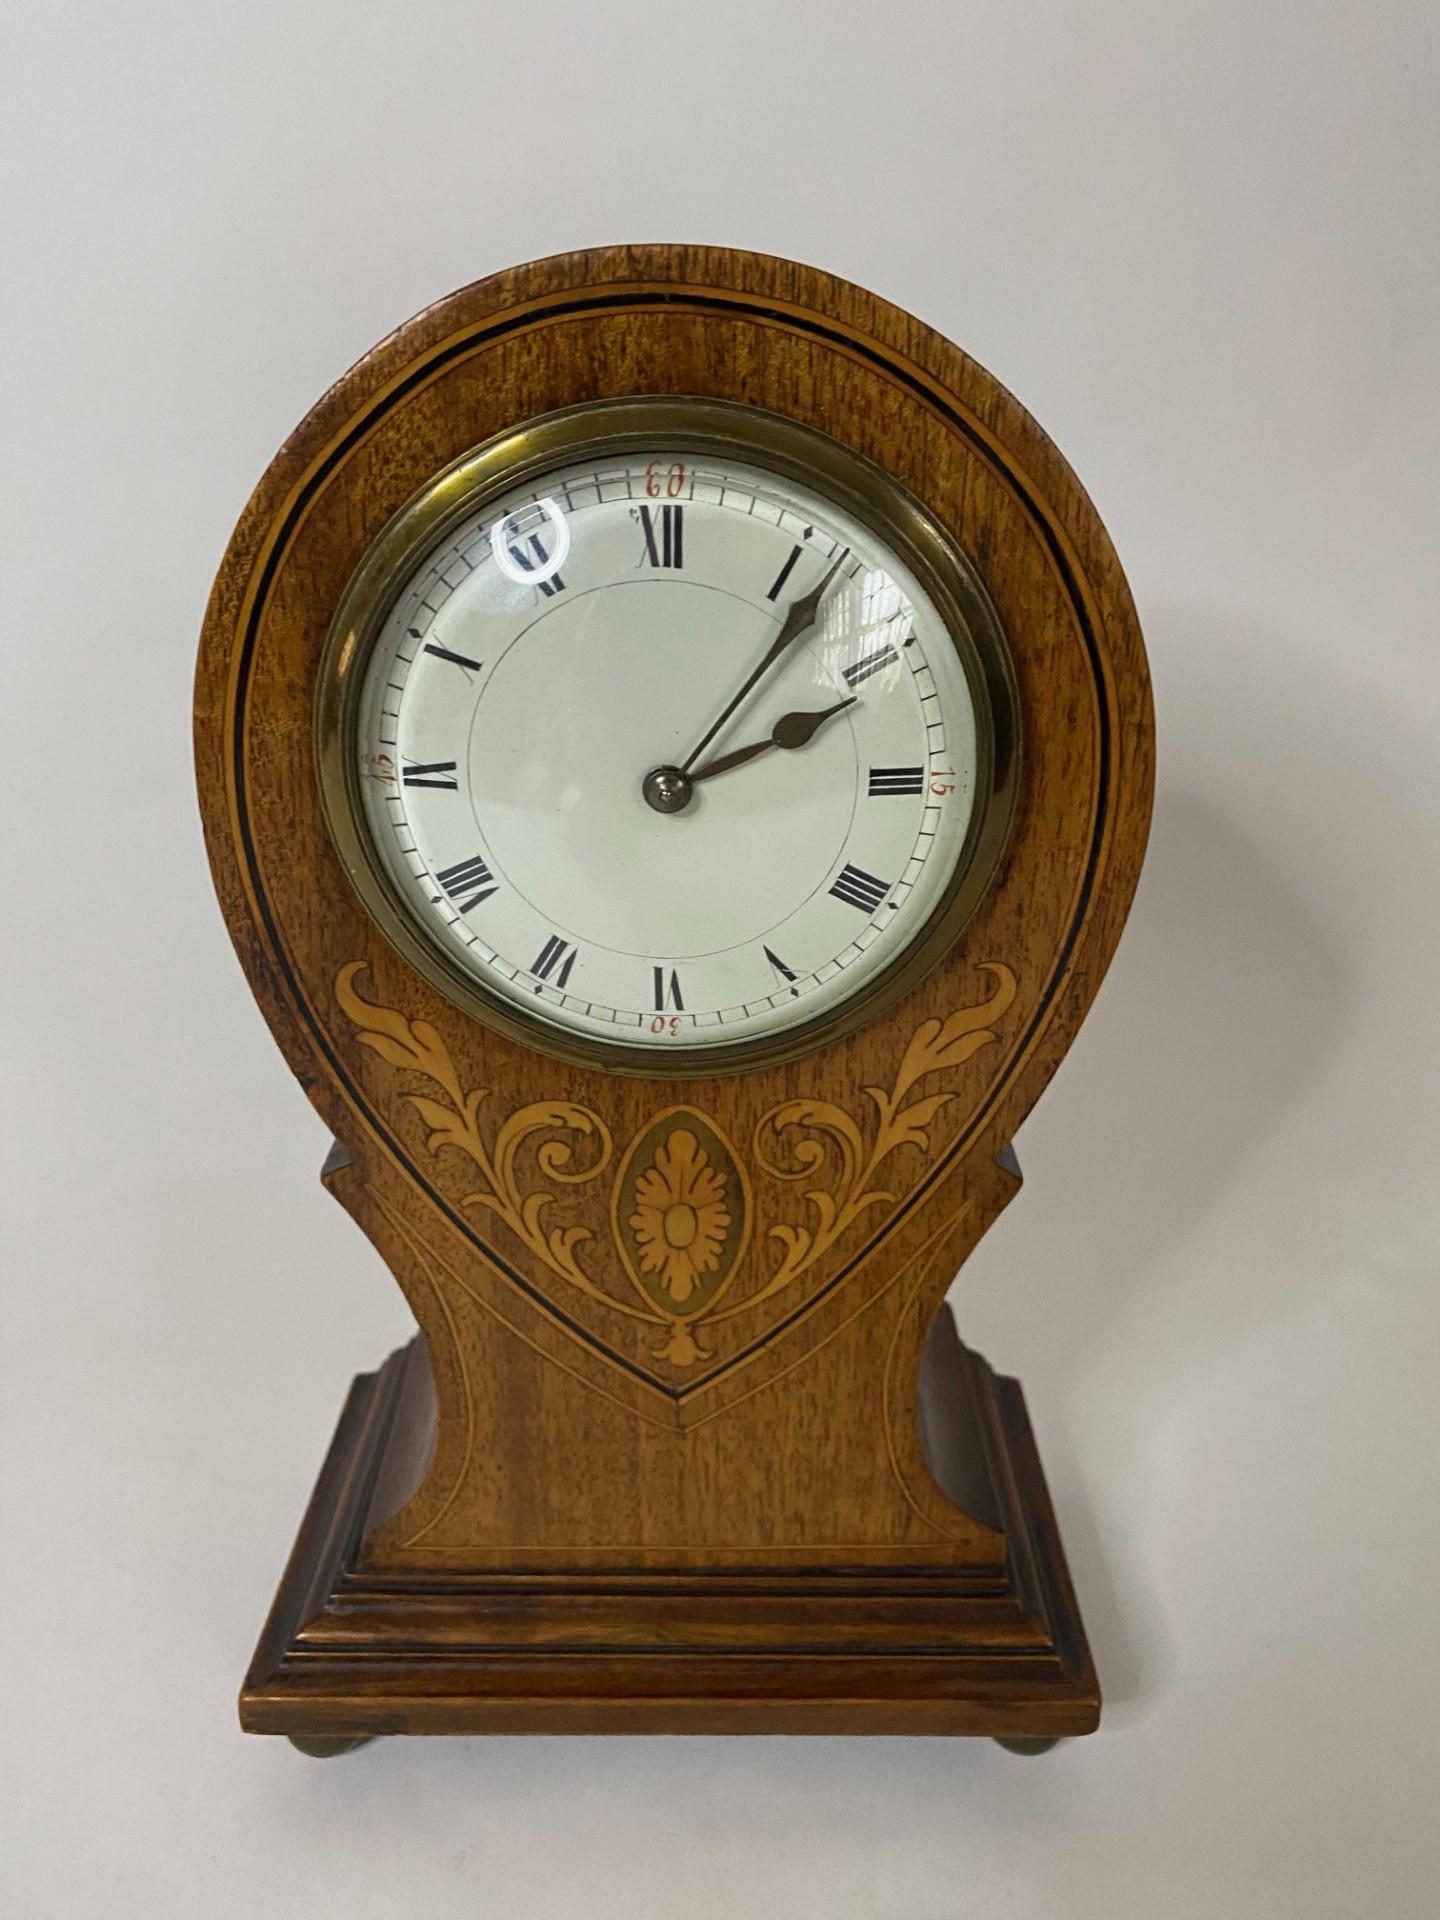 Attractive antique Edwardian inlaid mahogany balloon shaped mantle clock.  Quality mahogany case with decorative foliage inlay and a white enamel dial raised on four bun feet.  Circa 1900-1920.
